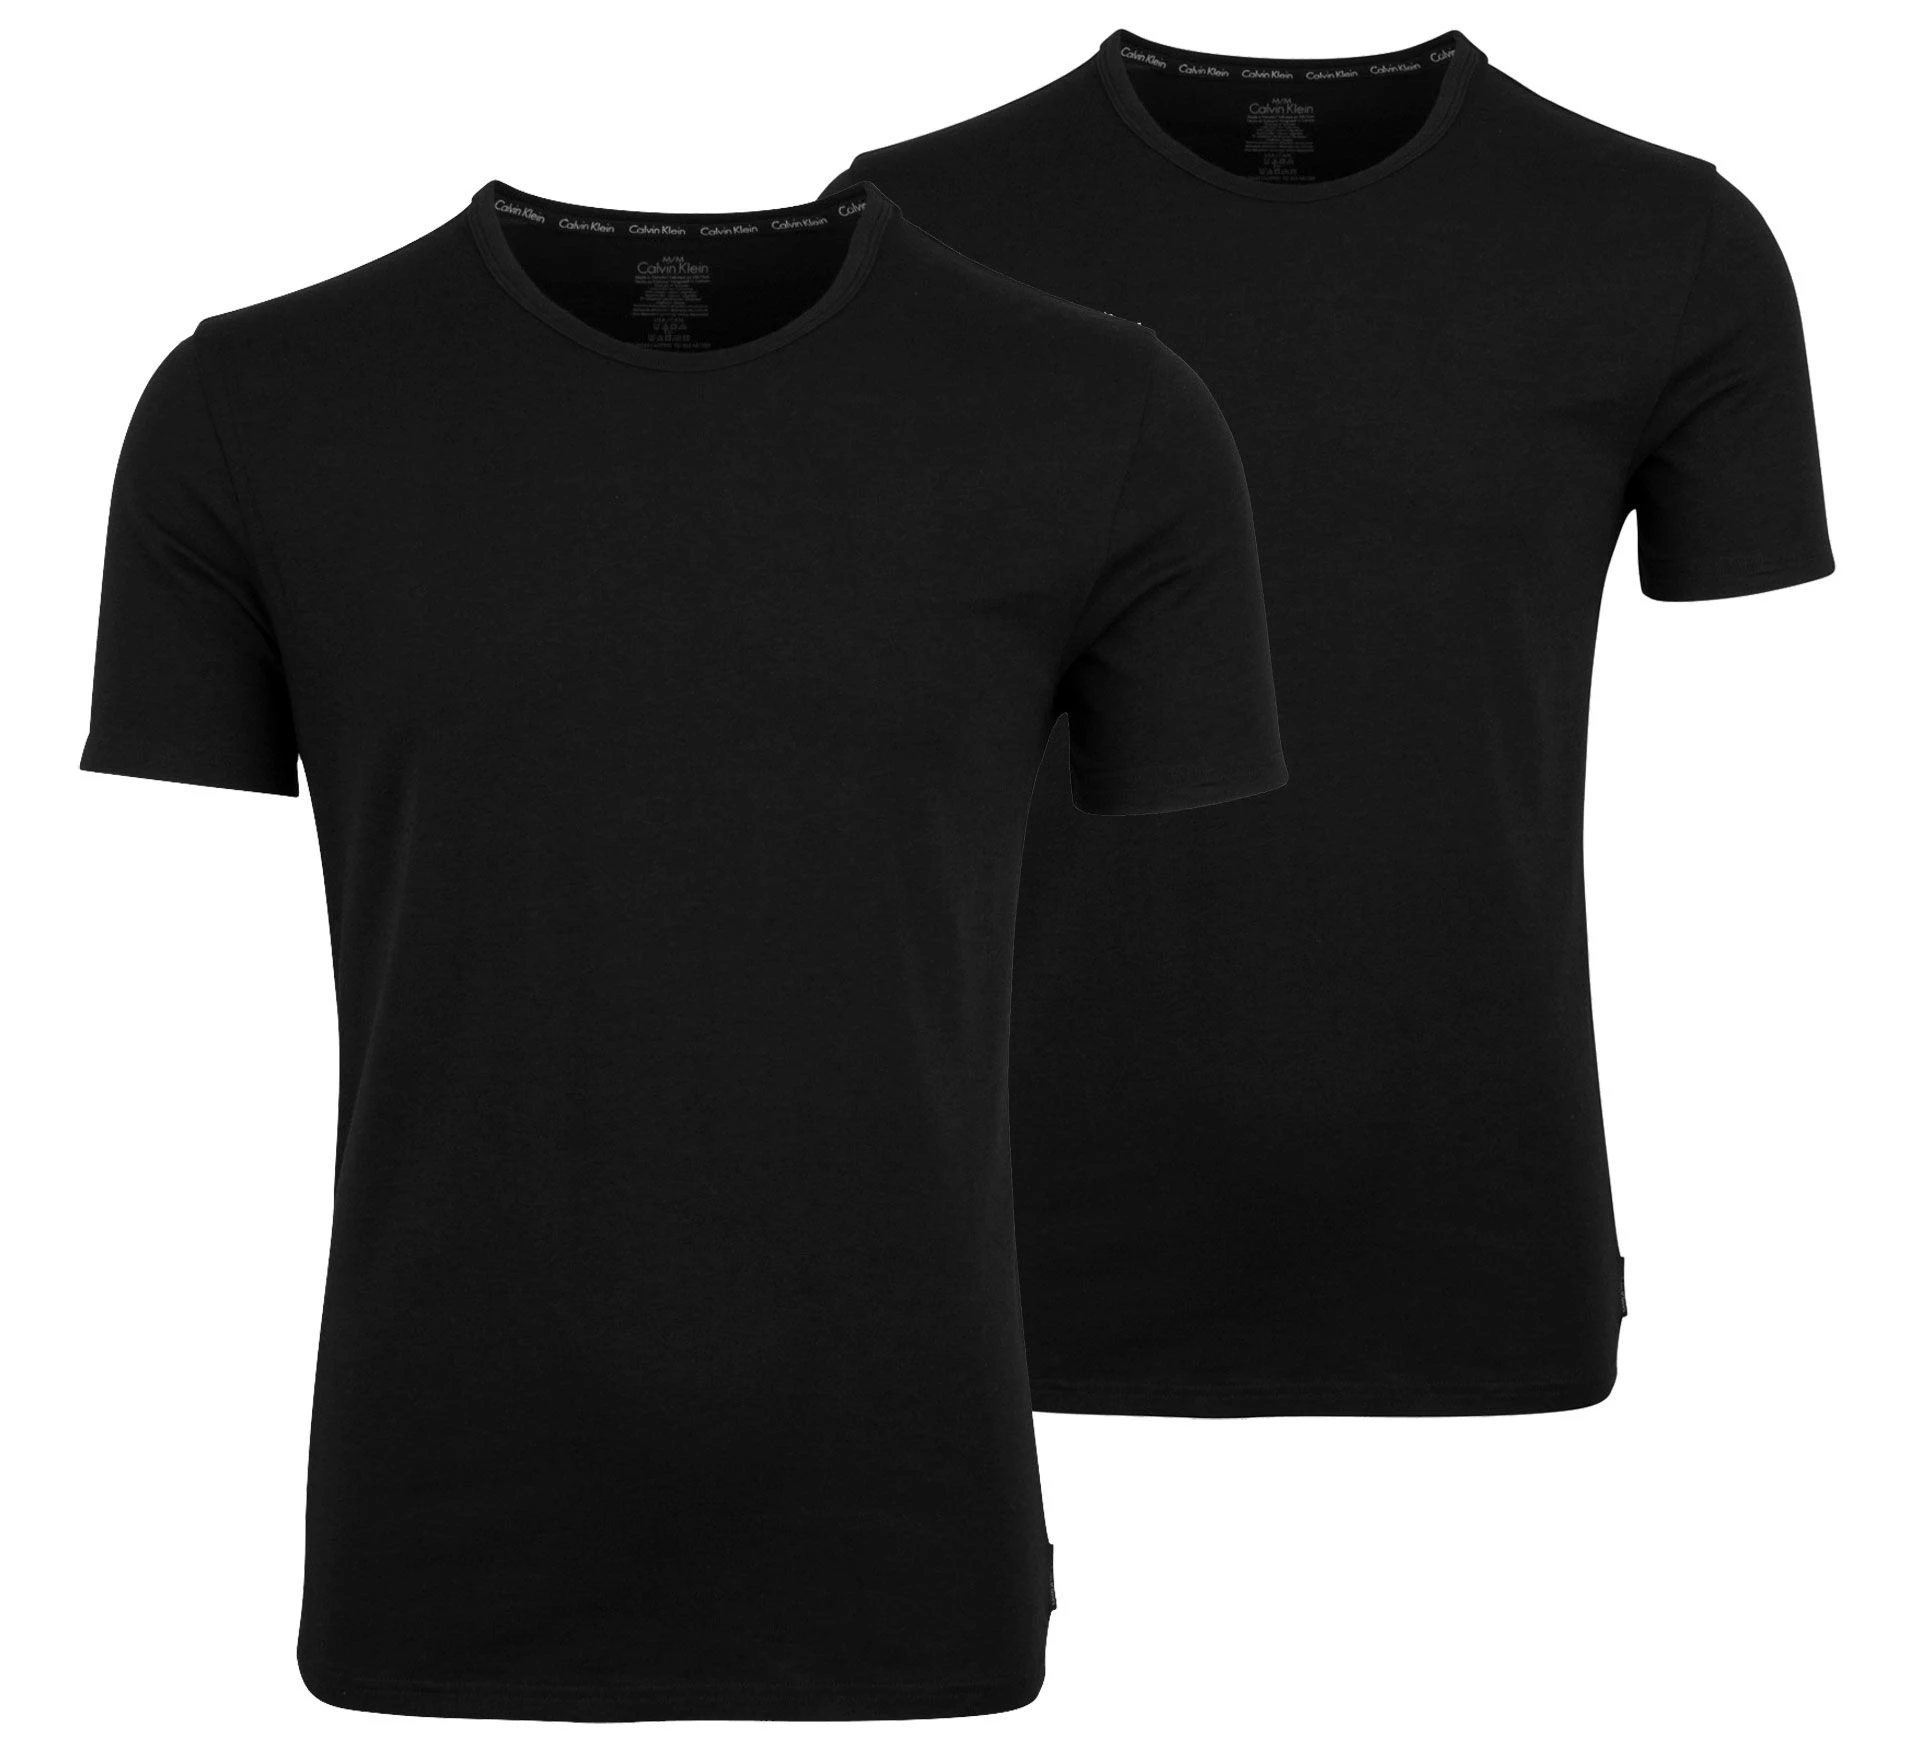 Nike S/S Crew Neck 2-Pack under shirt he